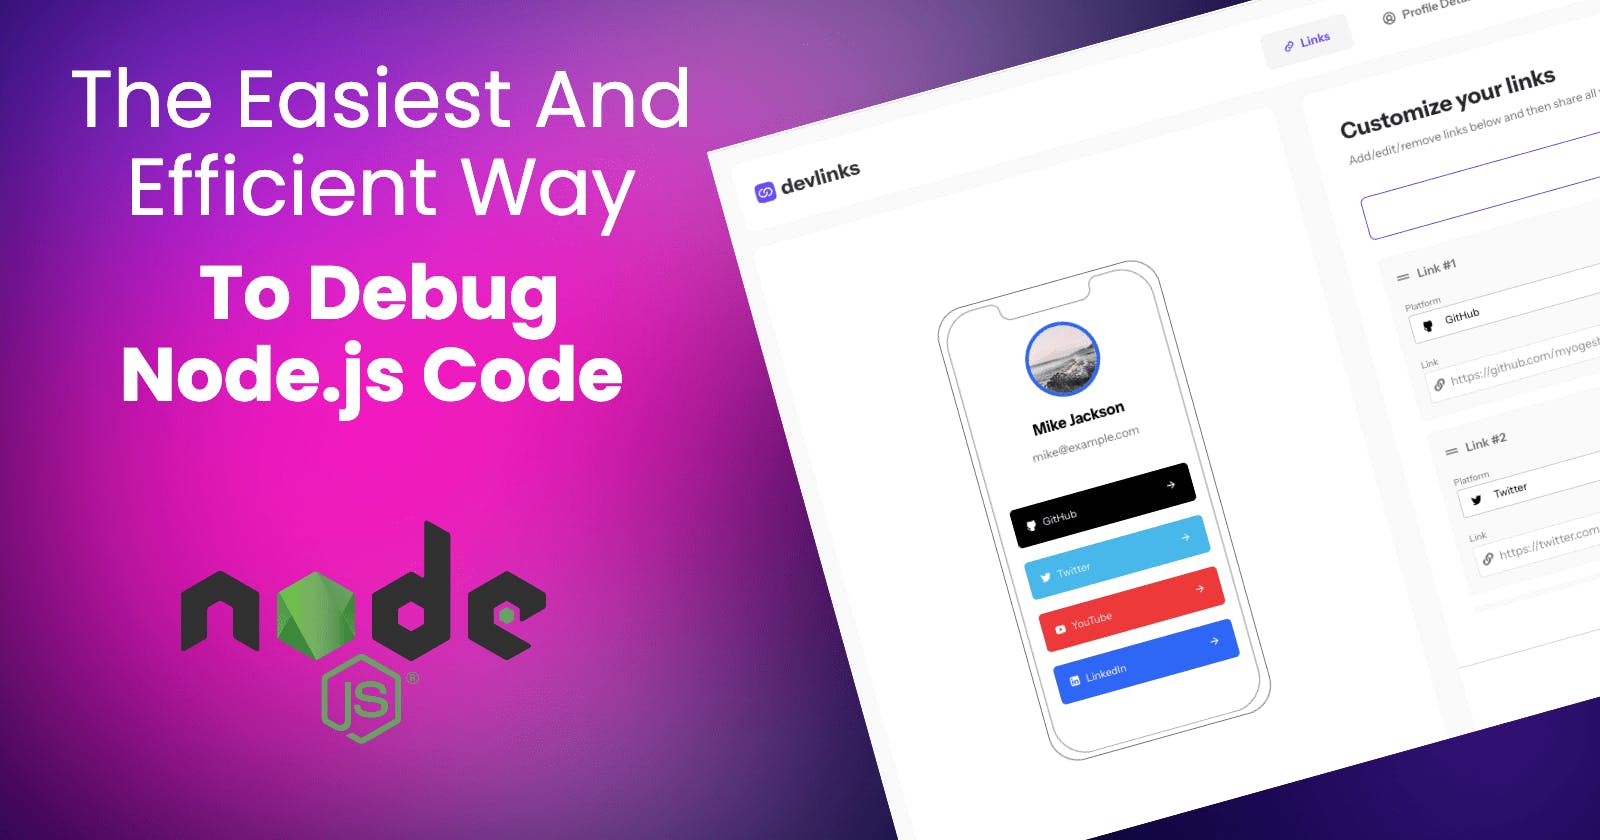 How to Debug Node.js Applications Using the debugger; Statement - Easiest Way